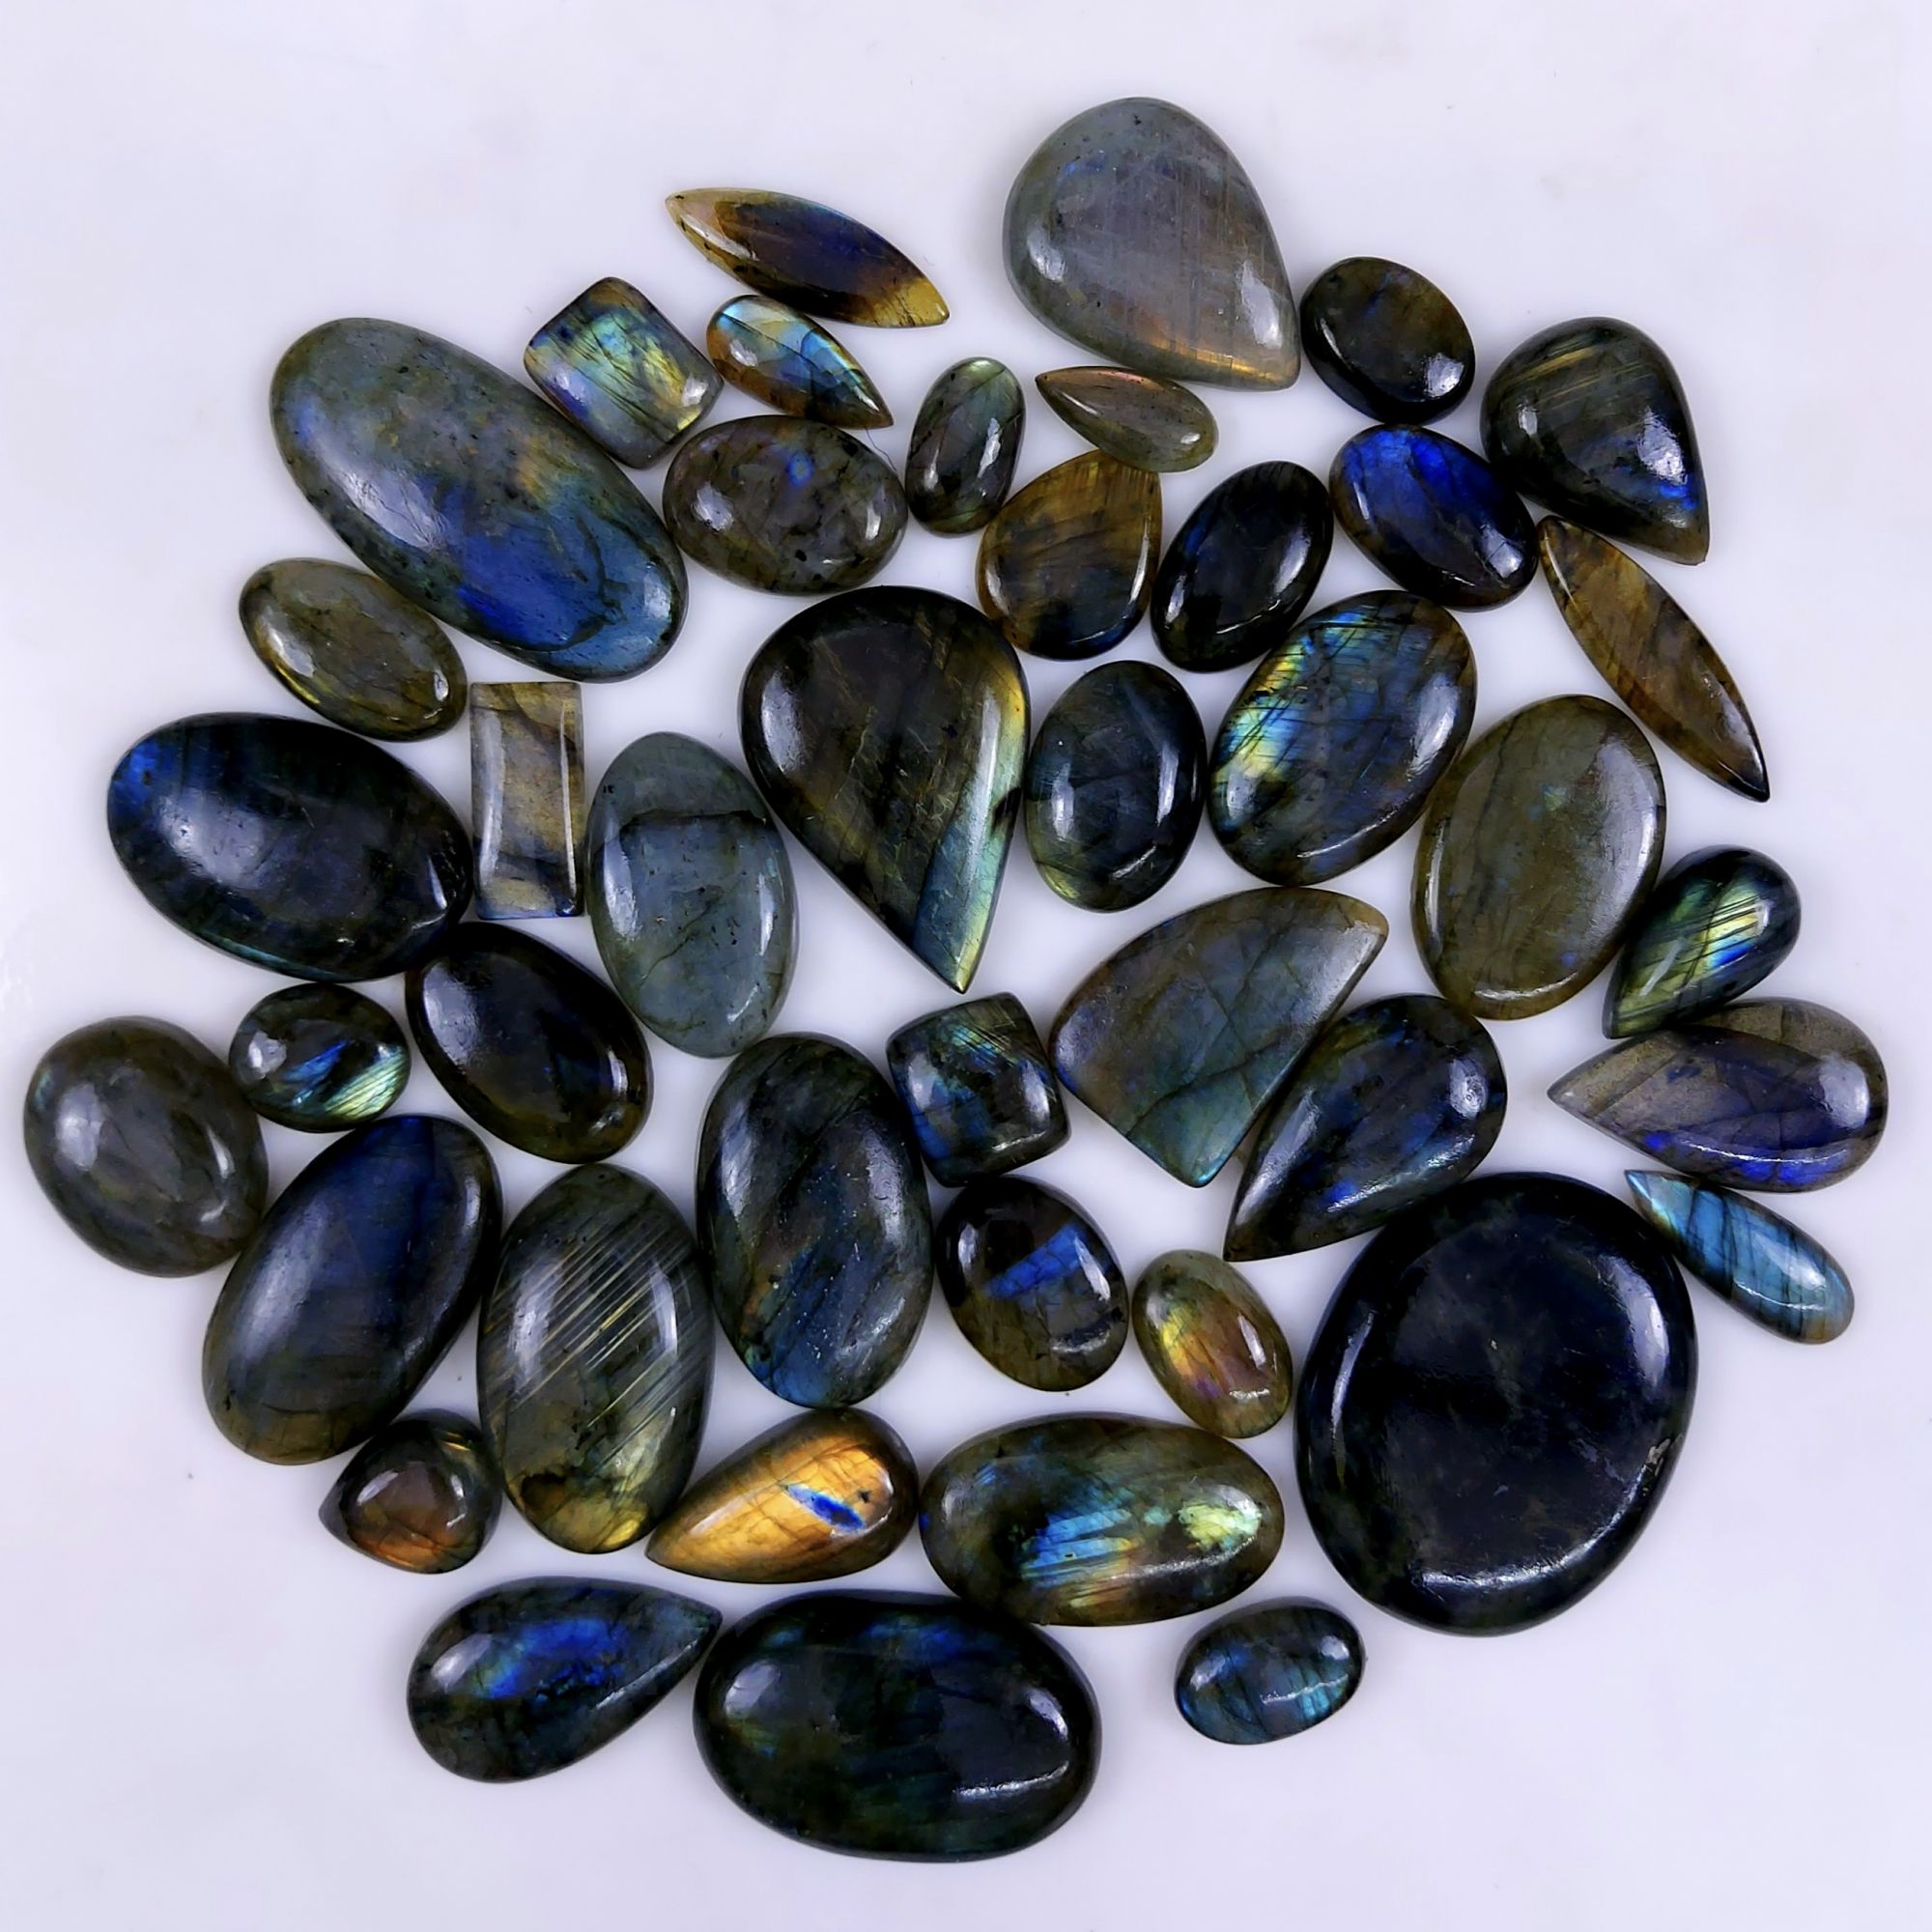 43pc 1516Cts Labradorite Cabochon Multifire Healing Crystal For Jewelry Supplies, Labradorite Necklace Handmade Wire Wrapped Gemstone Pendant 47x26 12x9mm#6314